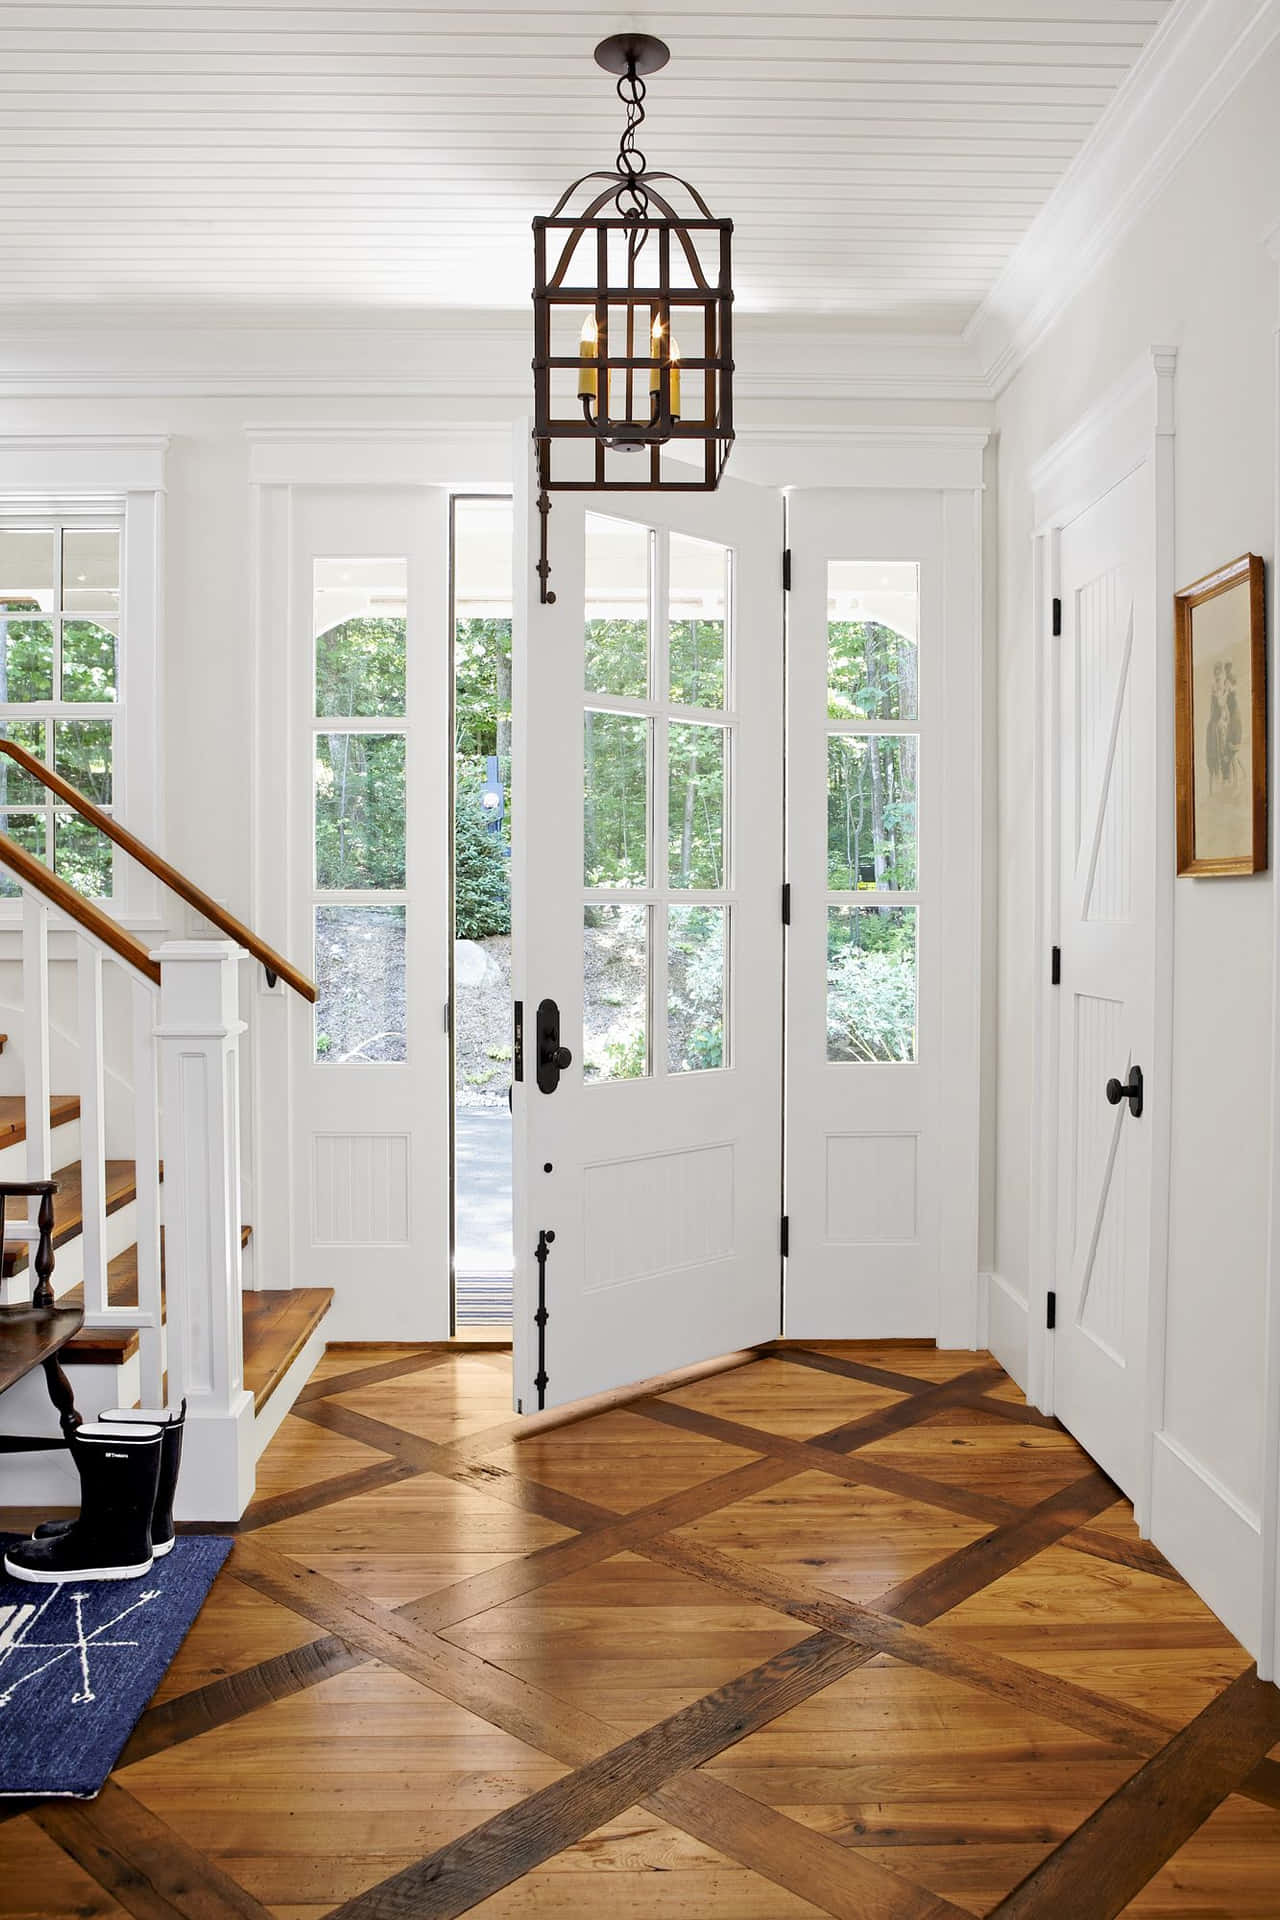 Prepare your home for a warm atmosphere with luxurious wood flooring